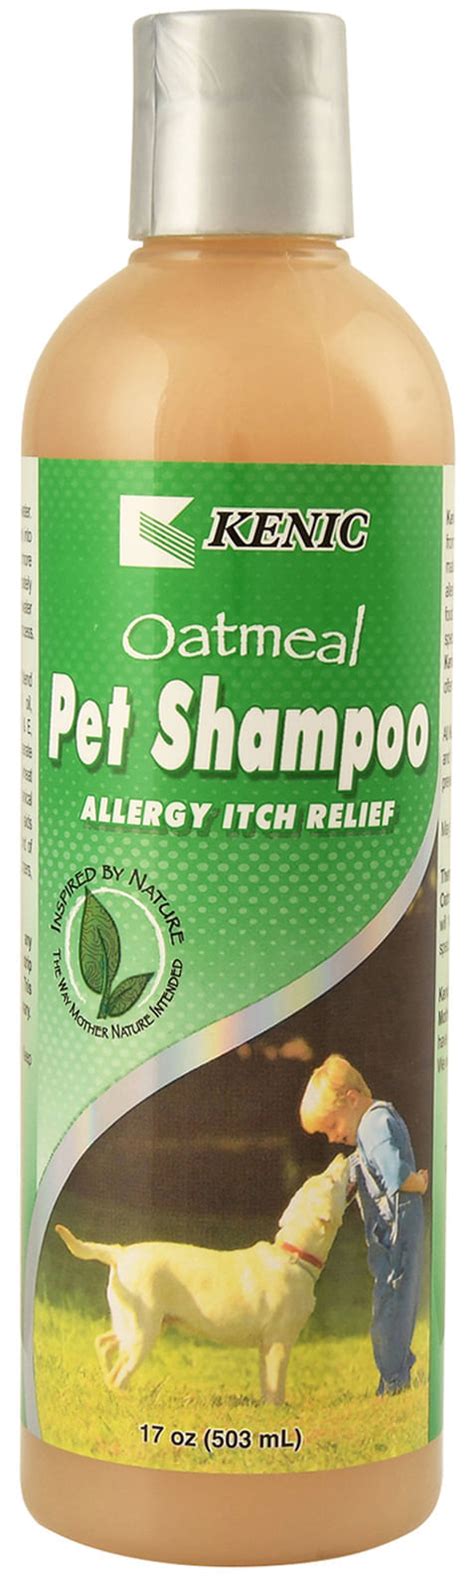 Kenic Oatmeal Pet Shampoo For Allergy Itch Relief Jeffers